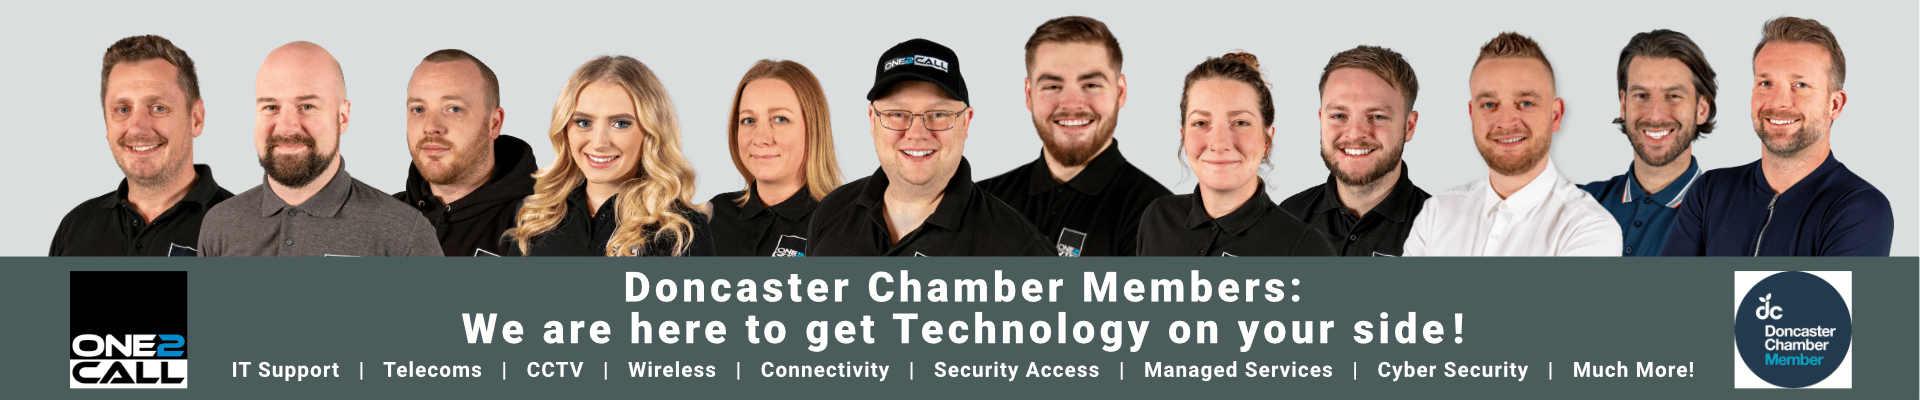 Doncaster Chamber Members: We are here to get Technology on your side!